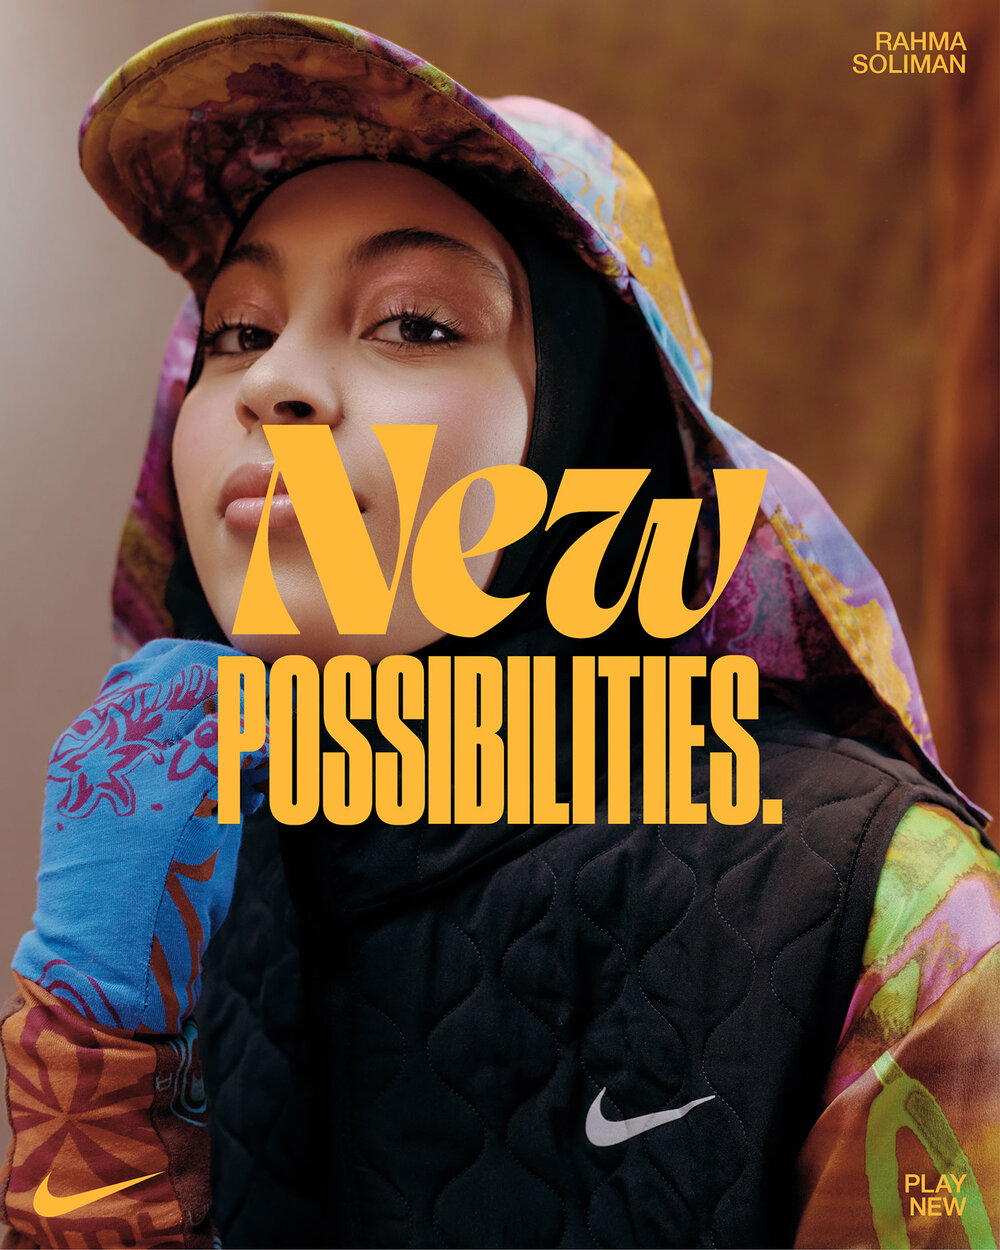 NIKE 'PLAY NEW' CAMPAIGN FEATURING EZI AND RAHMA — MANAGEMENT